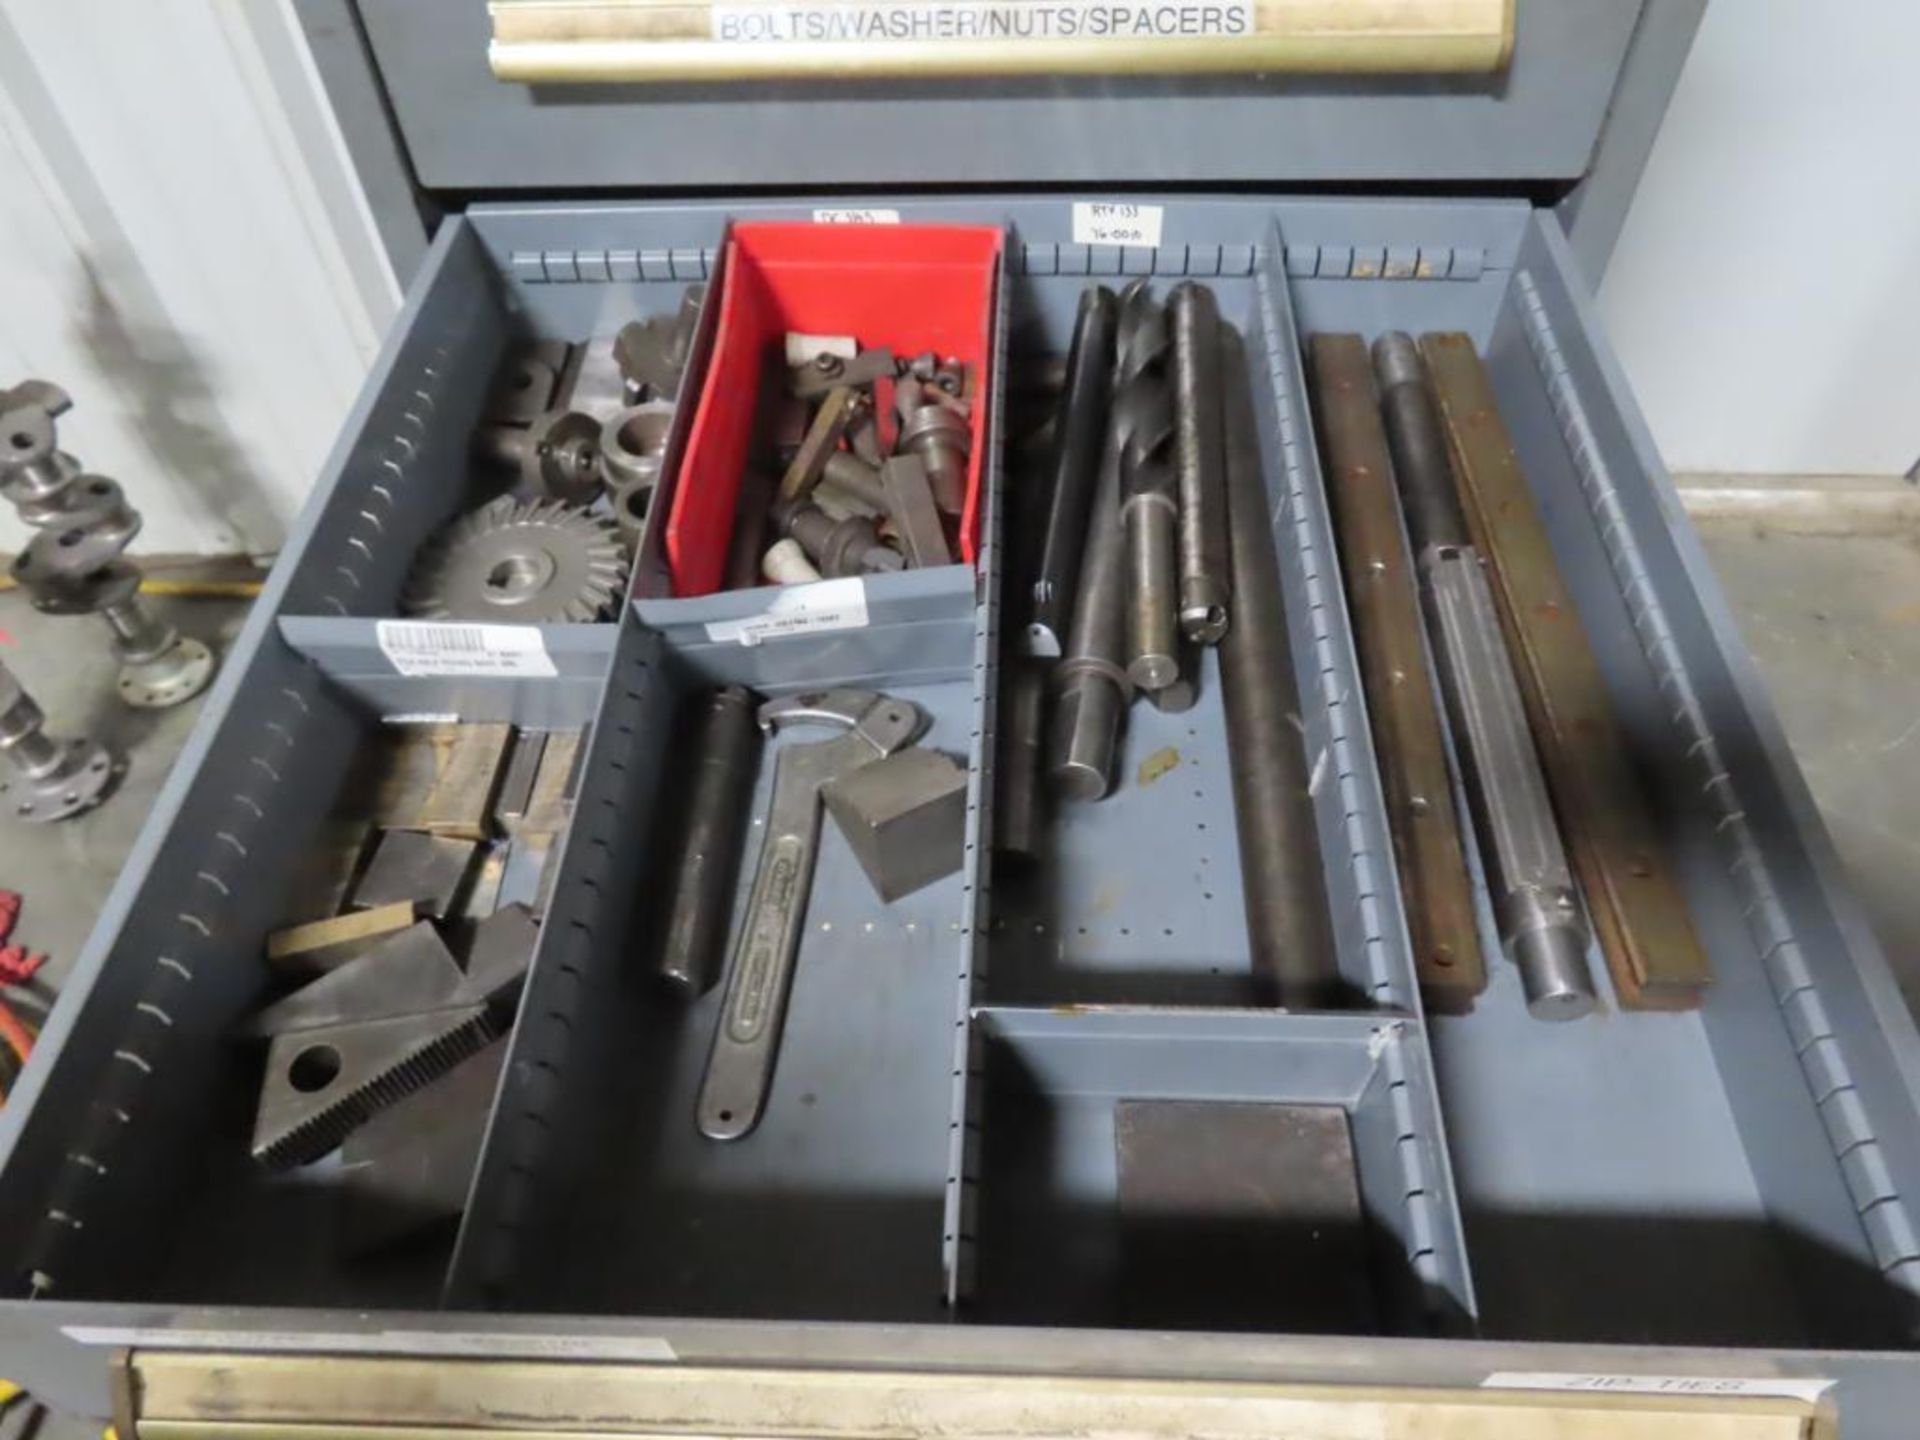 EQUIPTO 9-DRAWER TOOL CABINET W/CONTENTS - MILL TOOLING, CUTTERS & HOLD DOWNS - Image 6 of 11